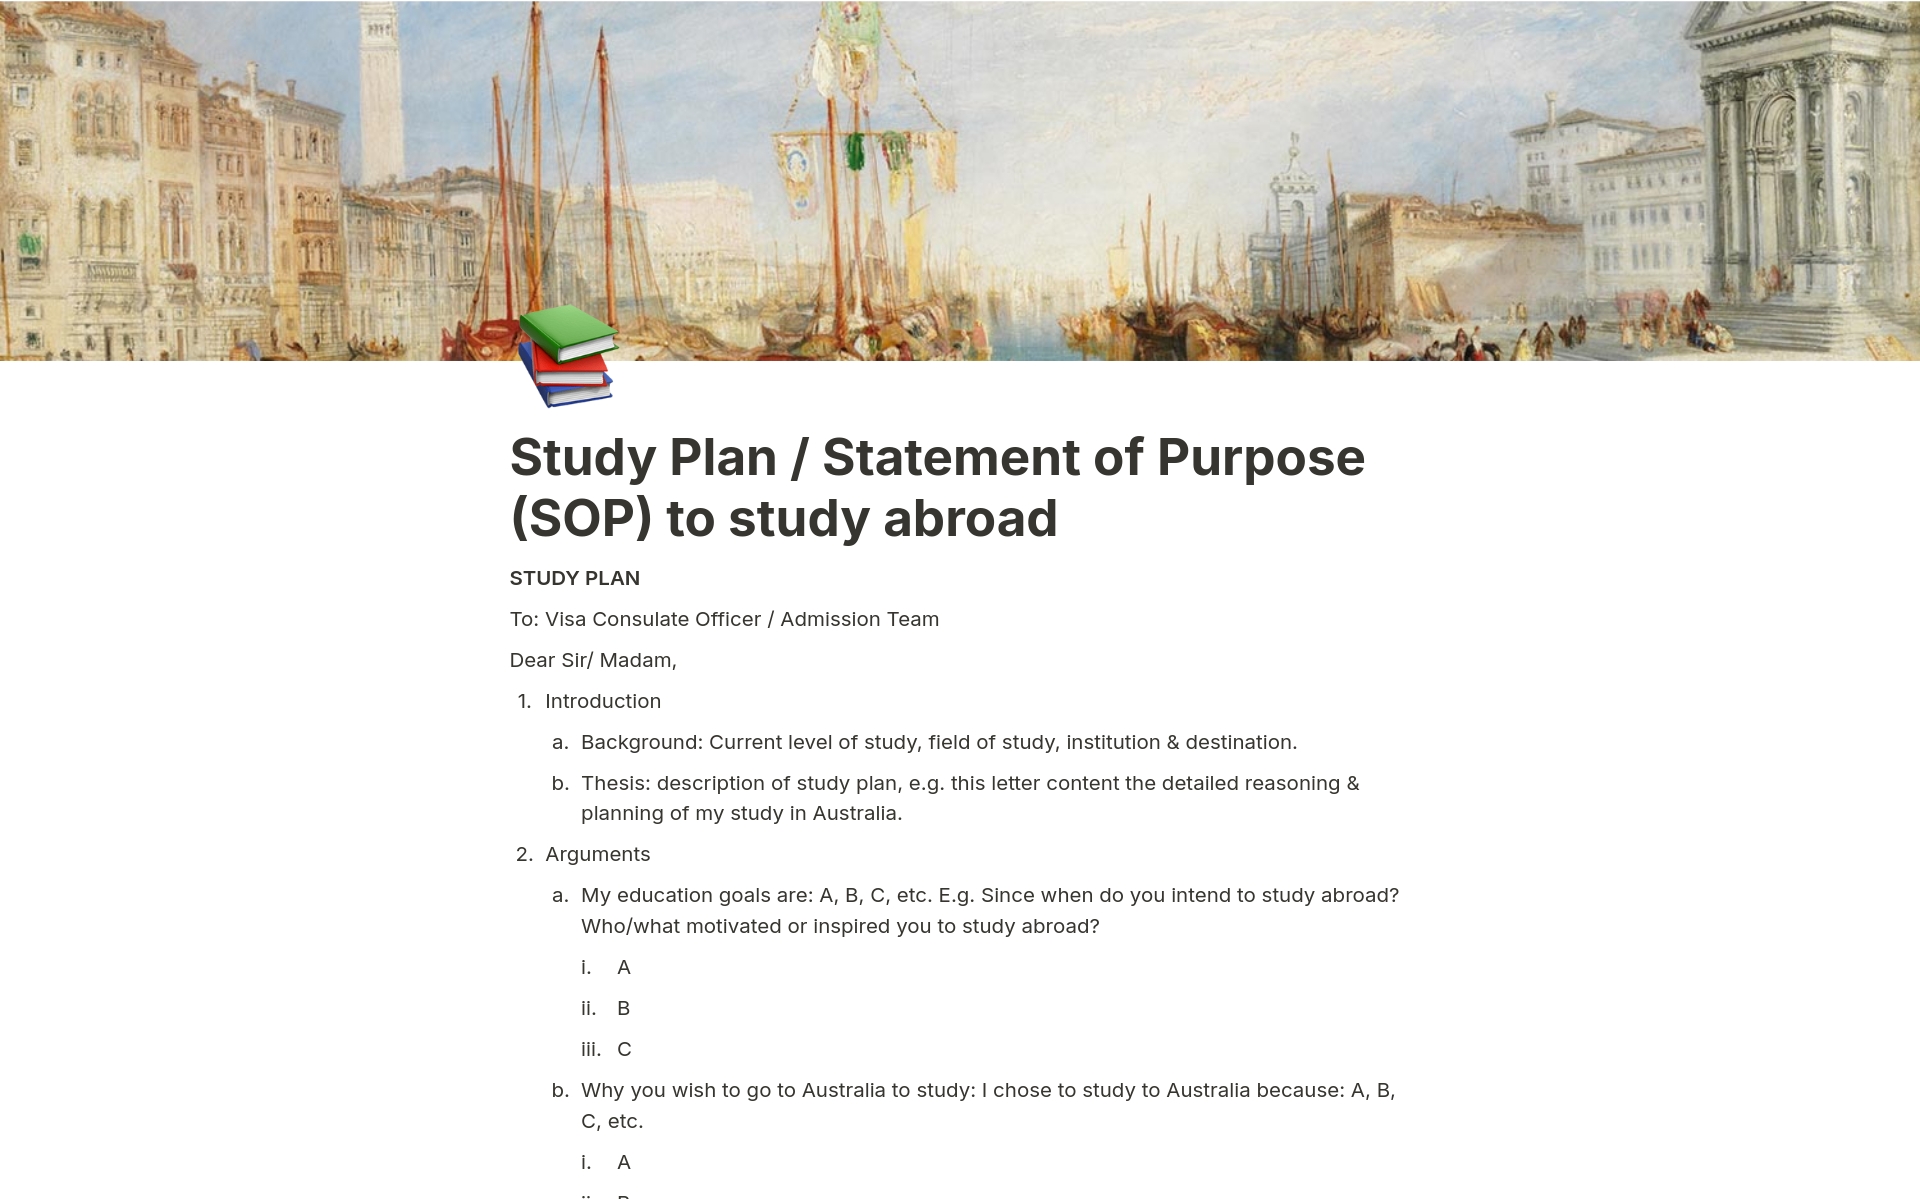 Elevate your study abroad journey with our Notion template, simplifying the creation of personalized Study Plans and Statements of Purpose for streamlined application success.